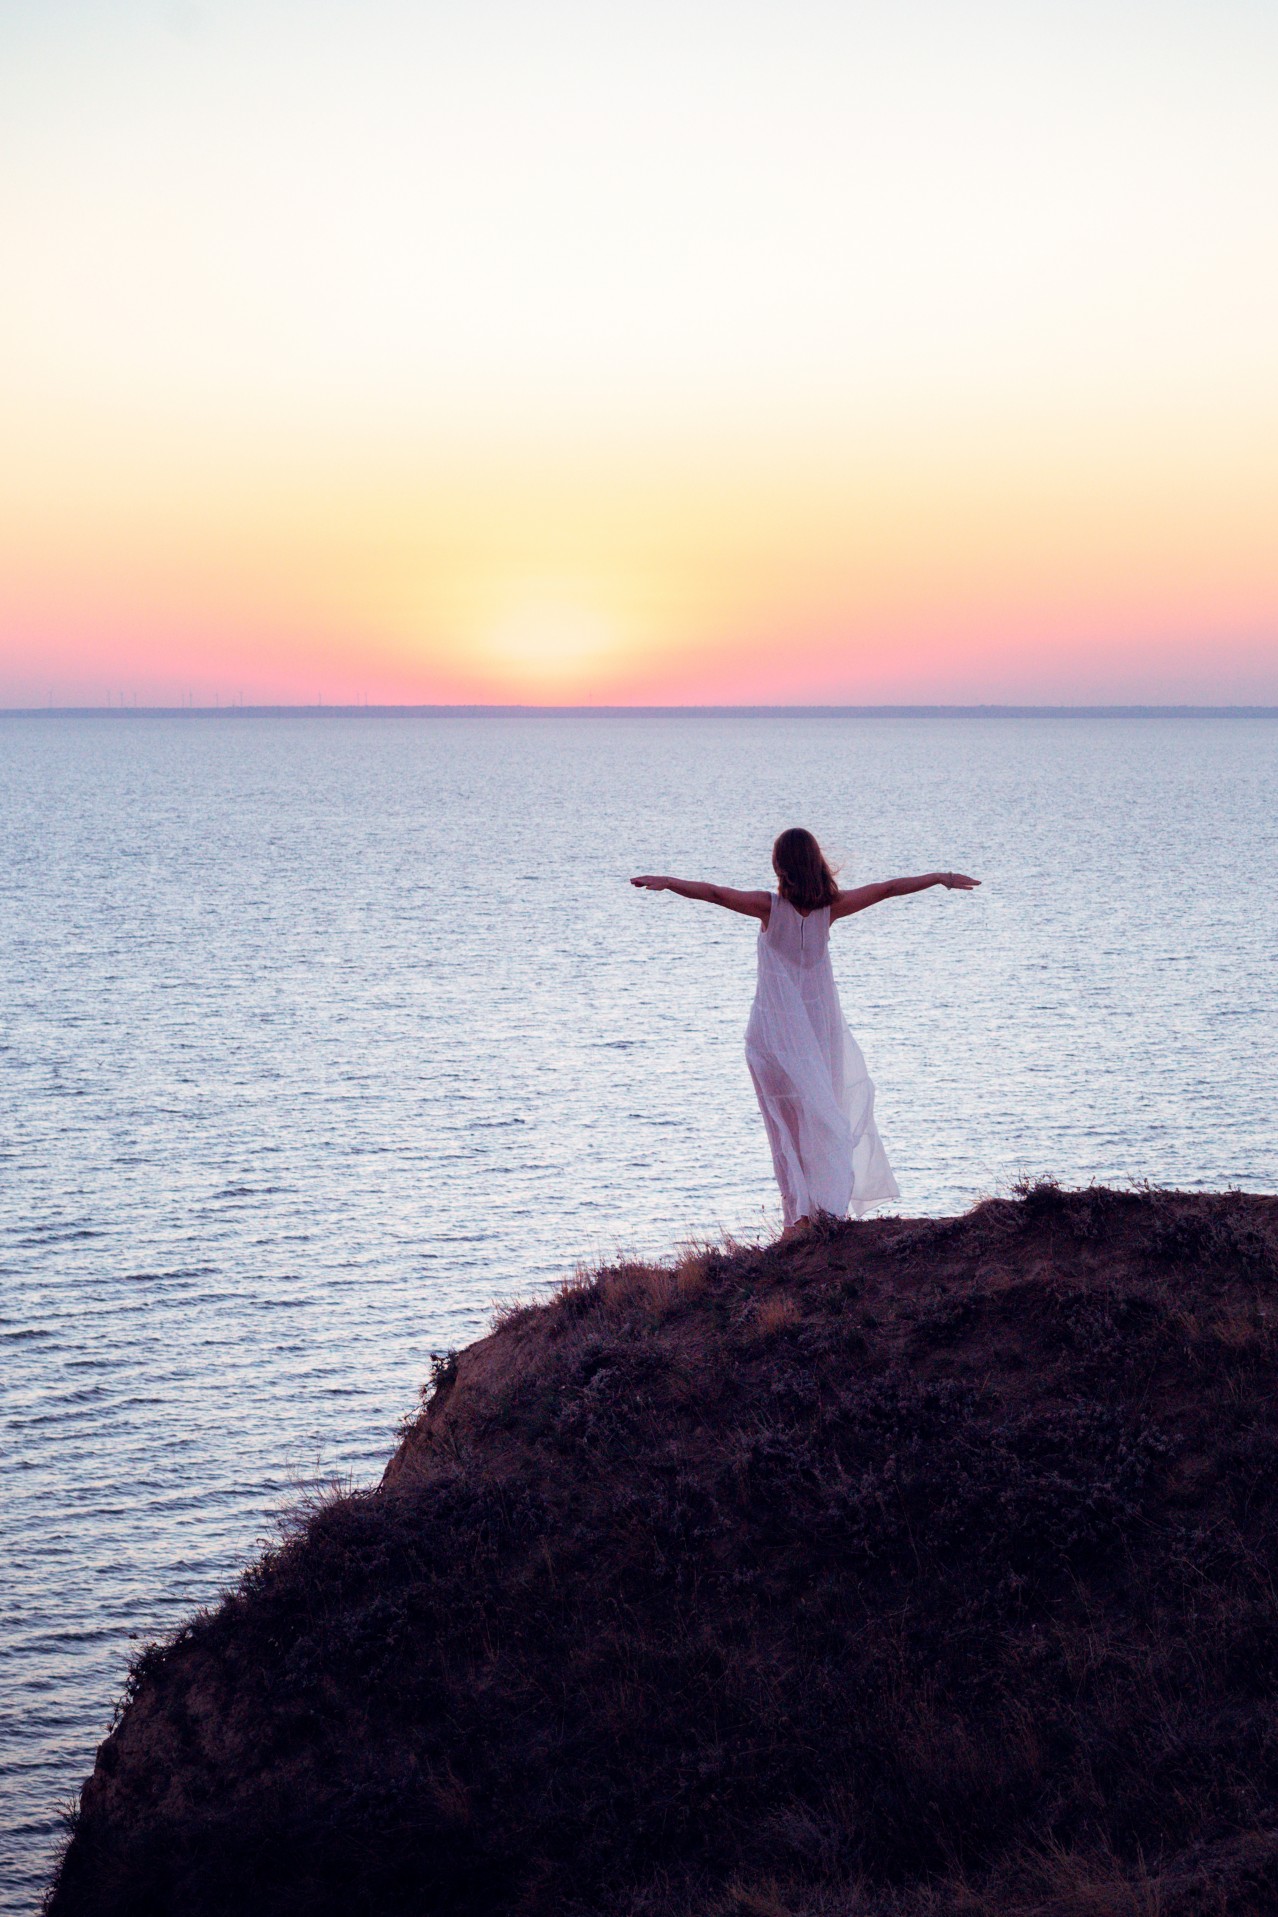 A Young Woman in a White Dress Admires the Sunset